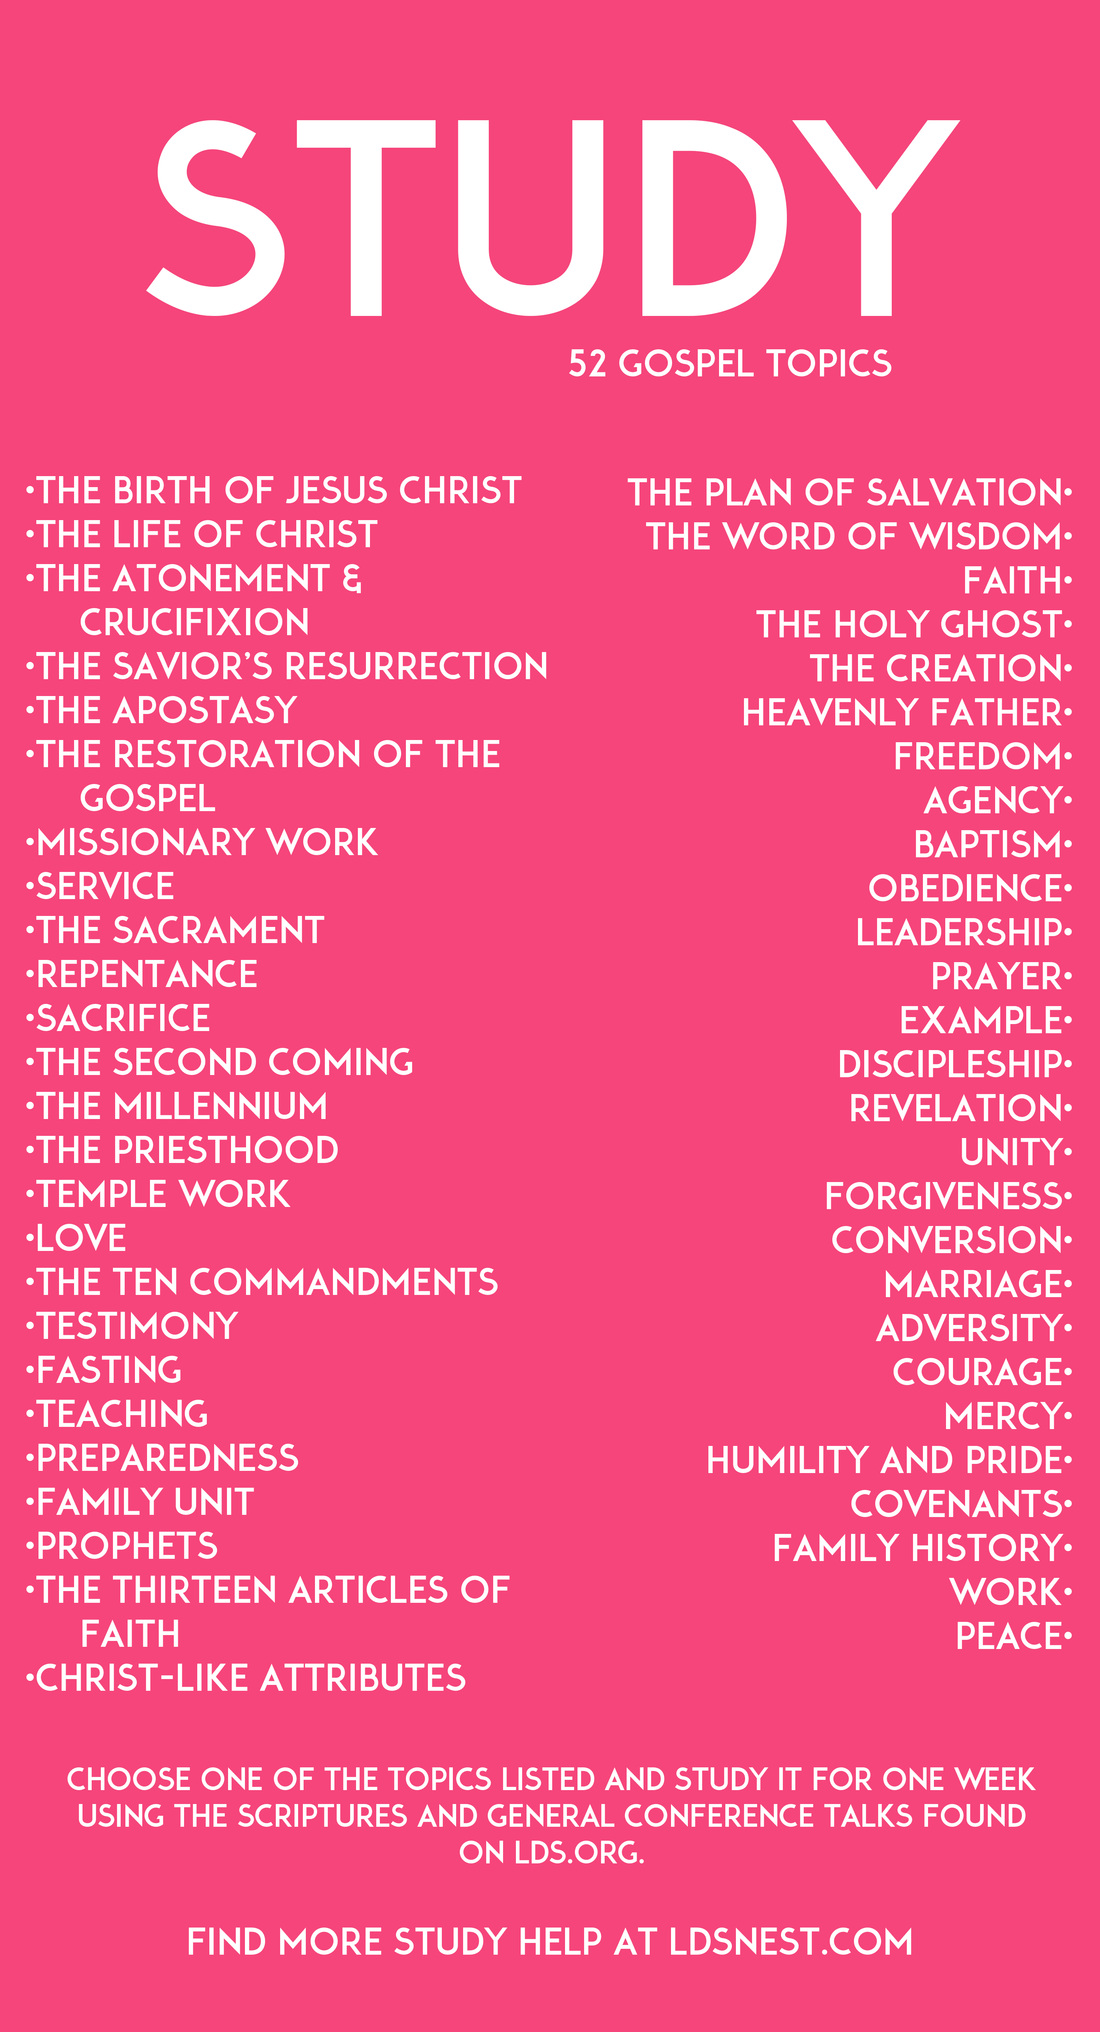 52 gospel study topics. Choose one each week and you're set for the year! #lds #ldsnest Use for personal study or for your classes and youth